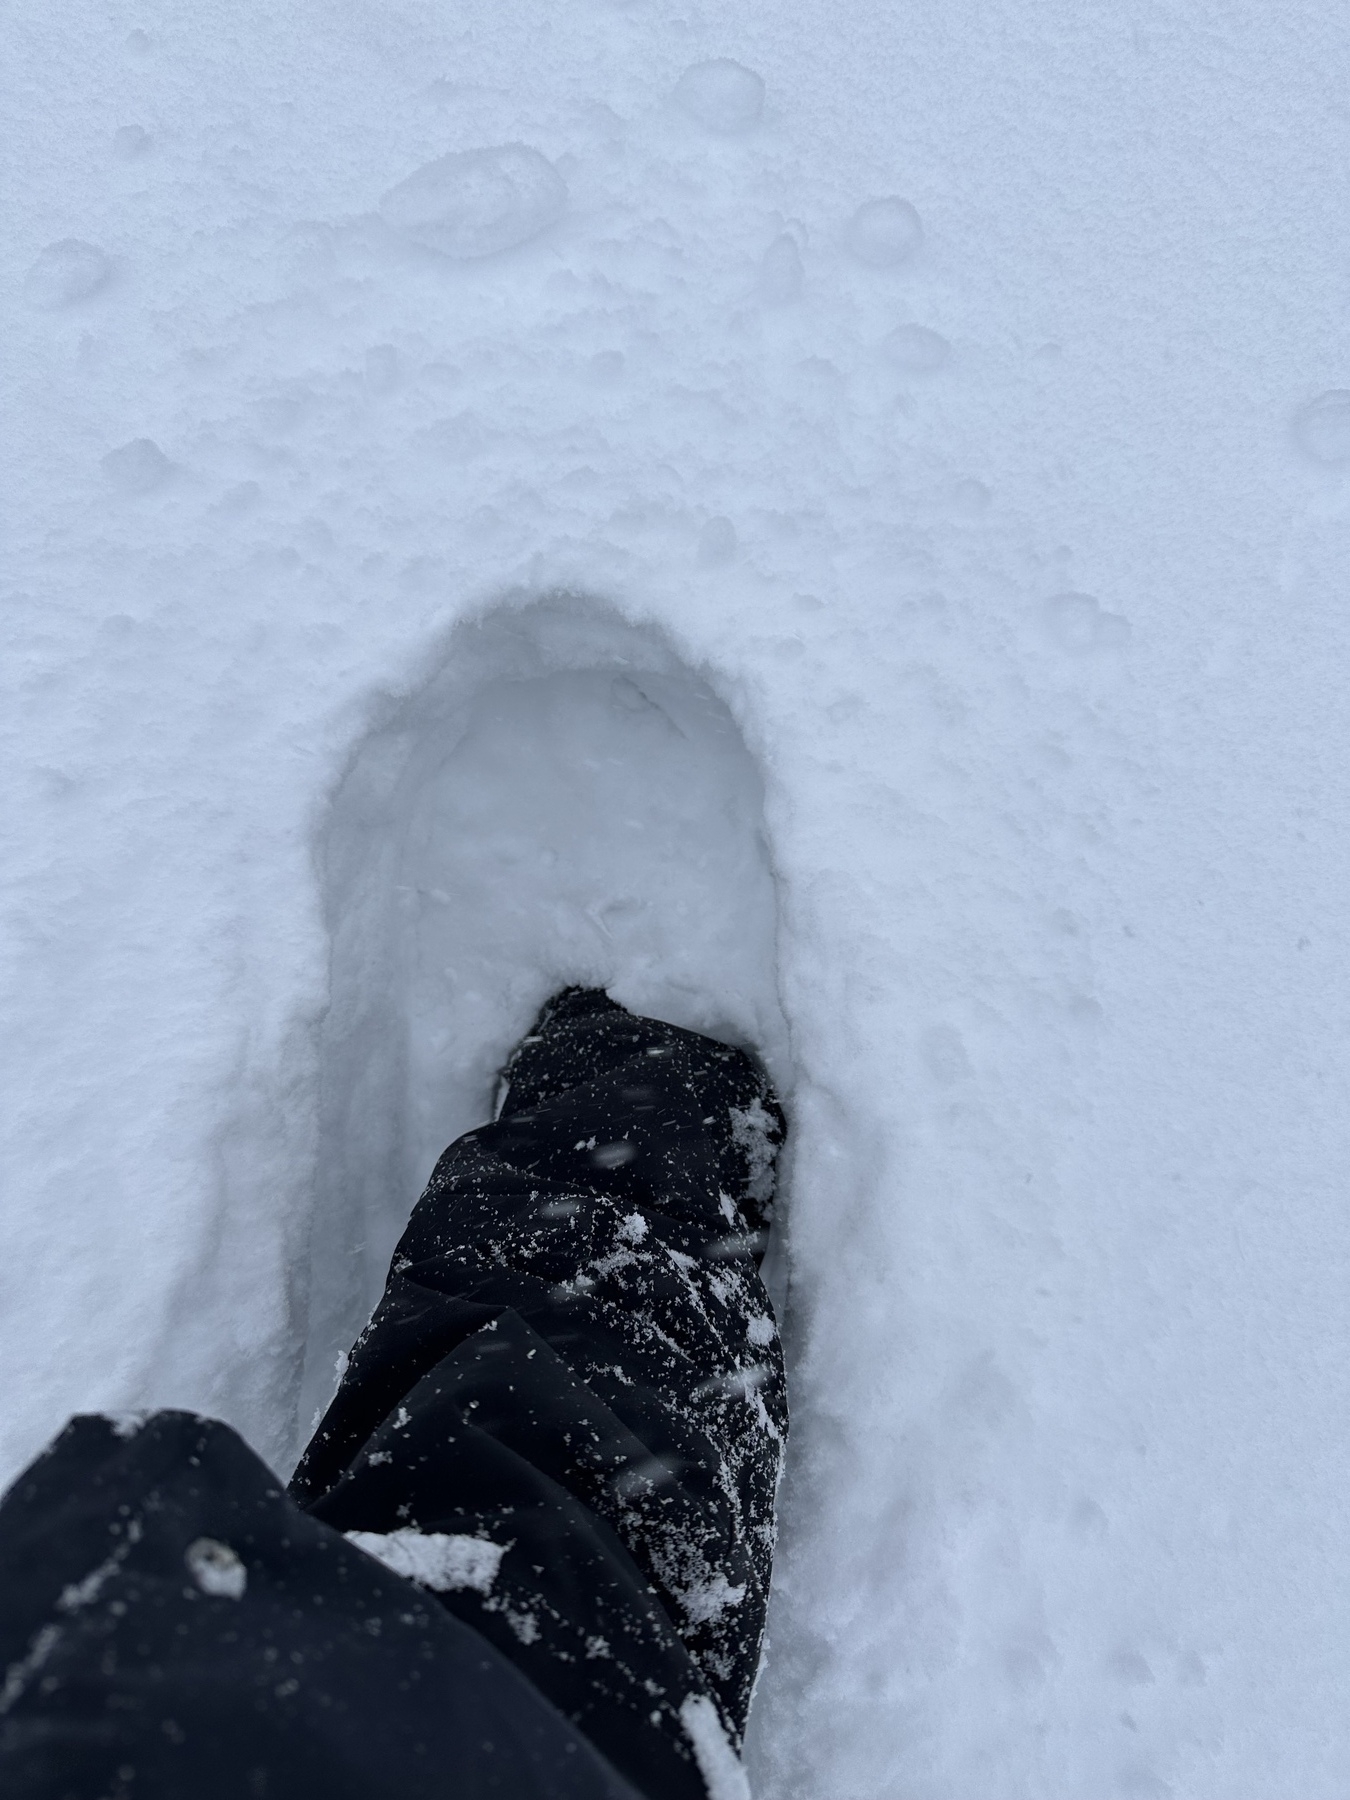 My leg knee deep in snow, shape of a snow shoe breaking the snow but shoes are deep down inside the blanket of snow